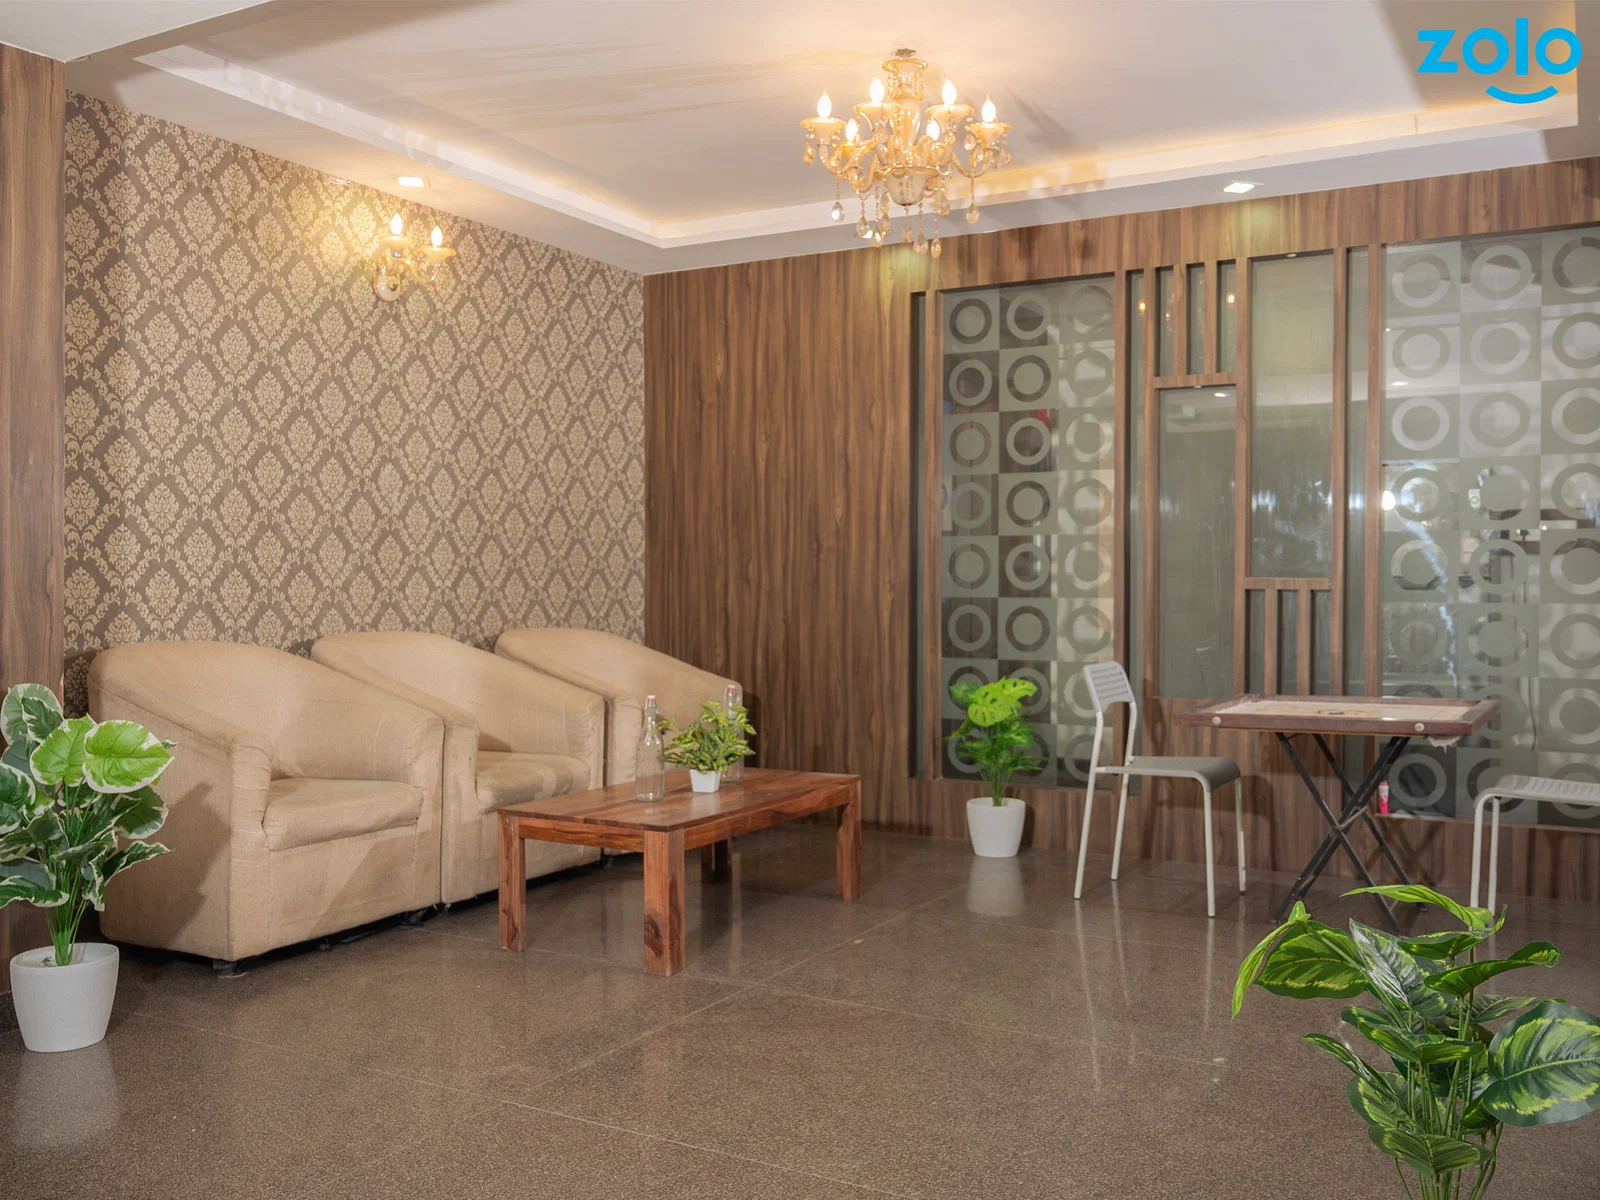 best unisex PGs in prime locations of Bangalore with all amenities-book now-Zolo Enzyme